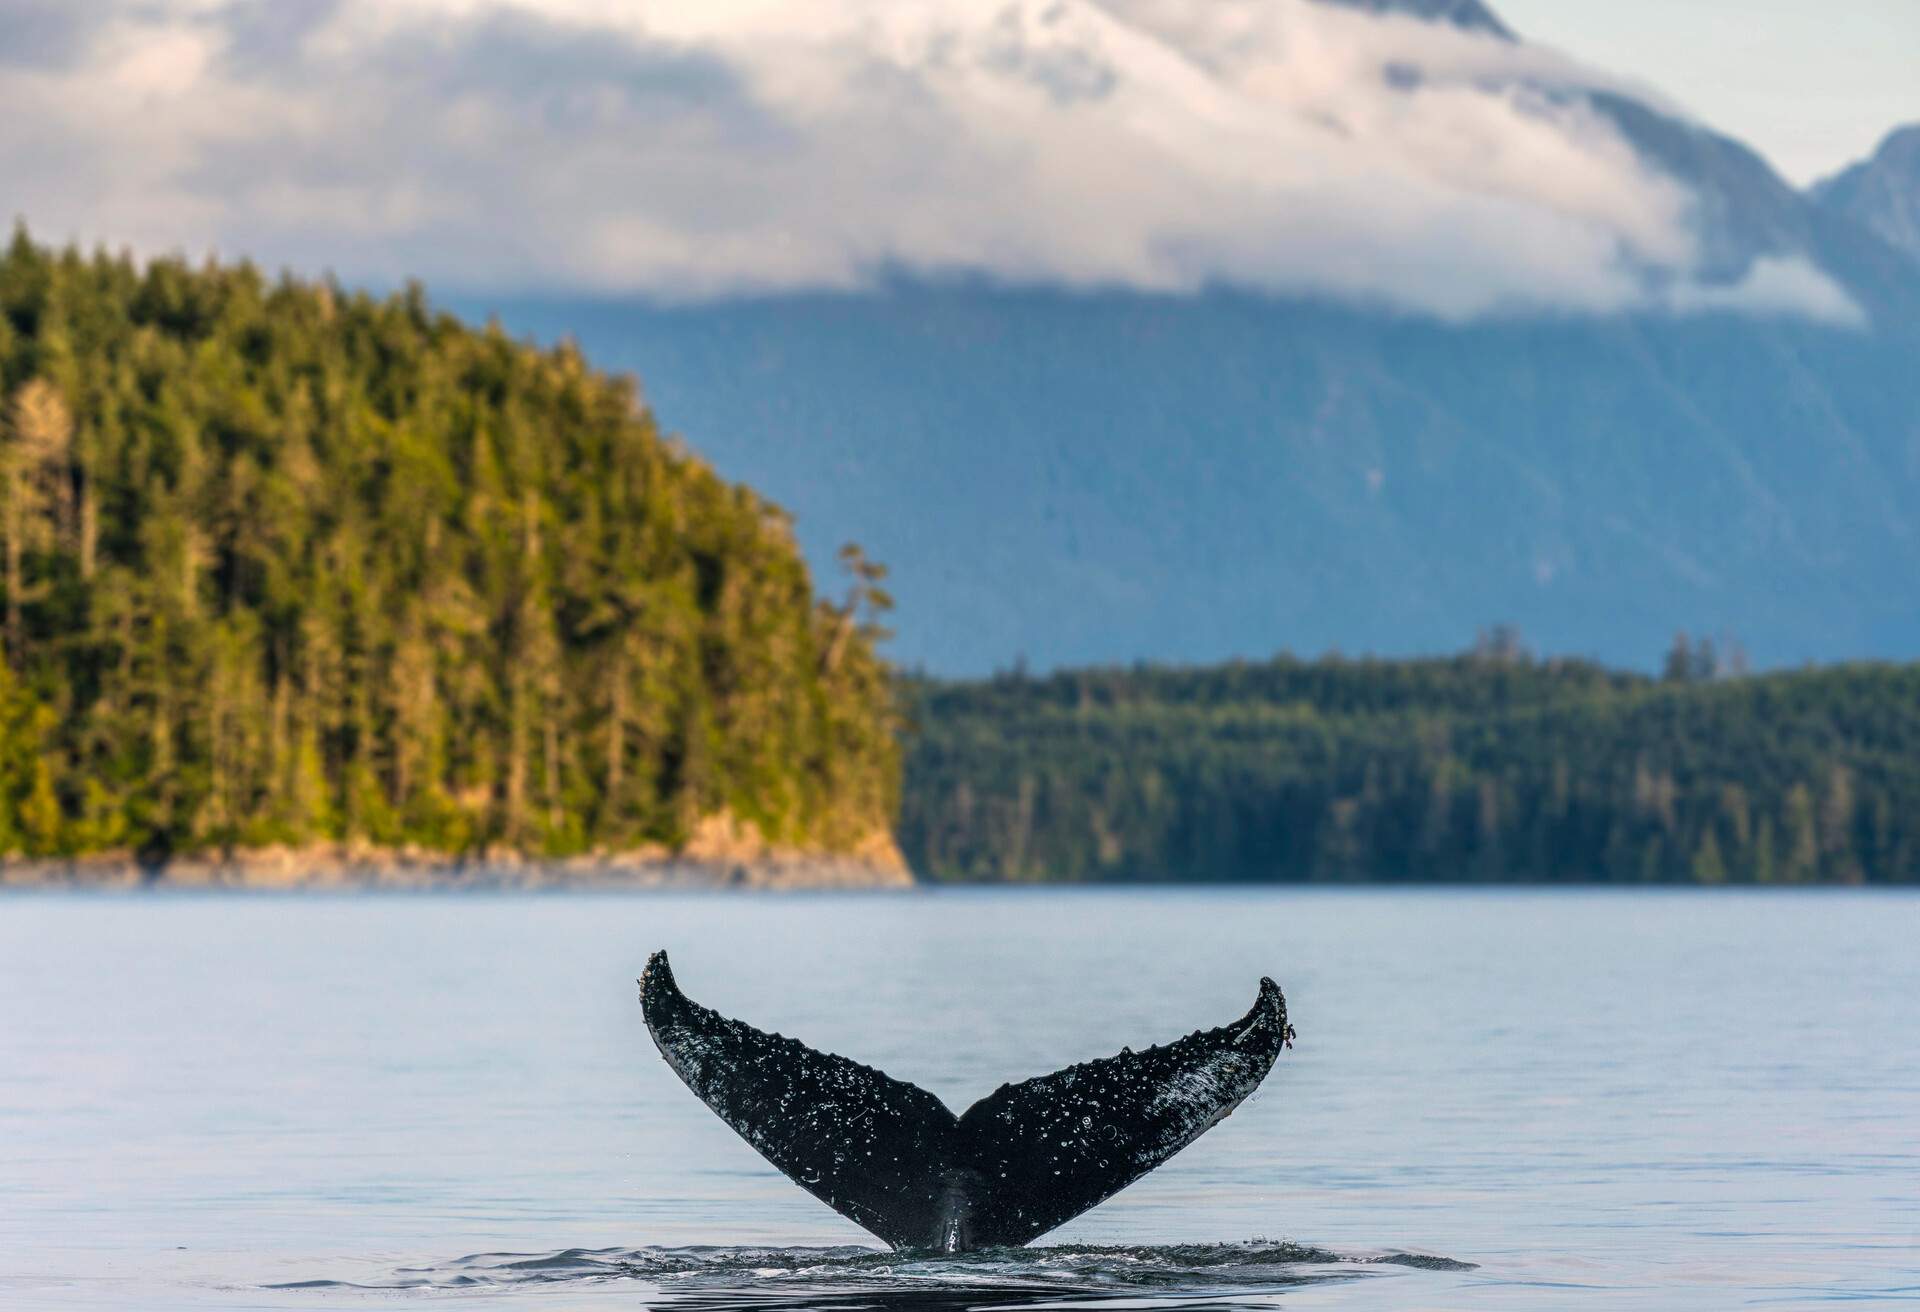 A black whale's tail emerges from the surface of the water.